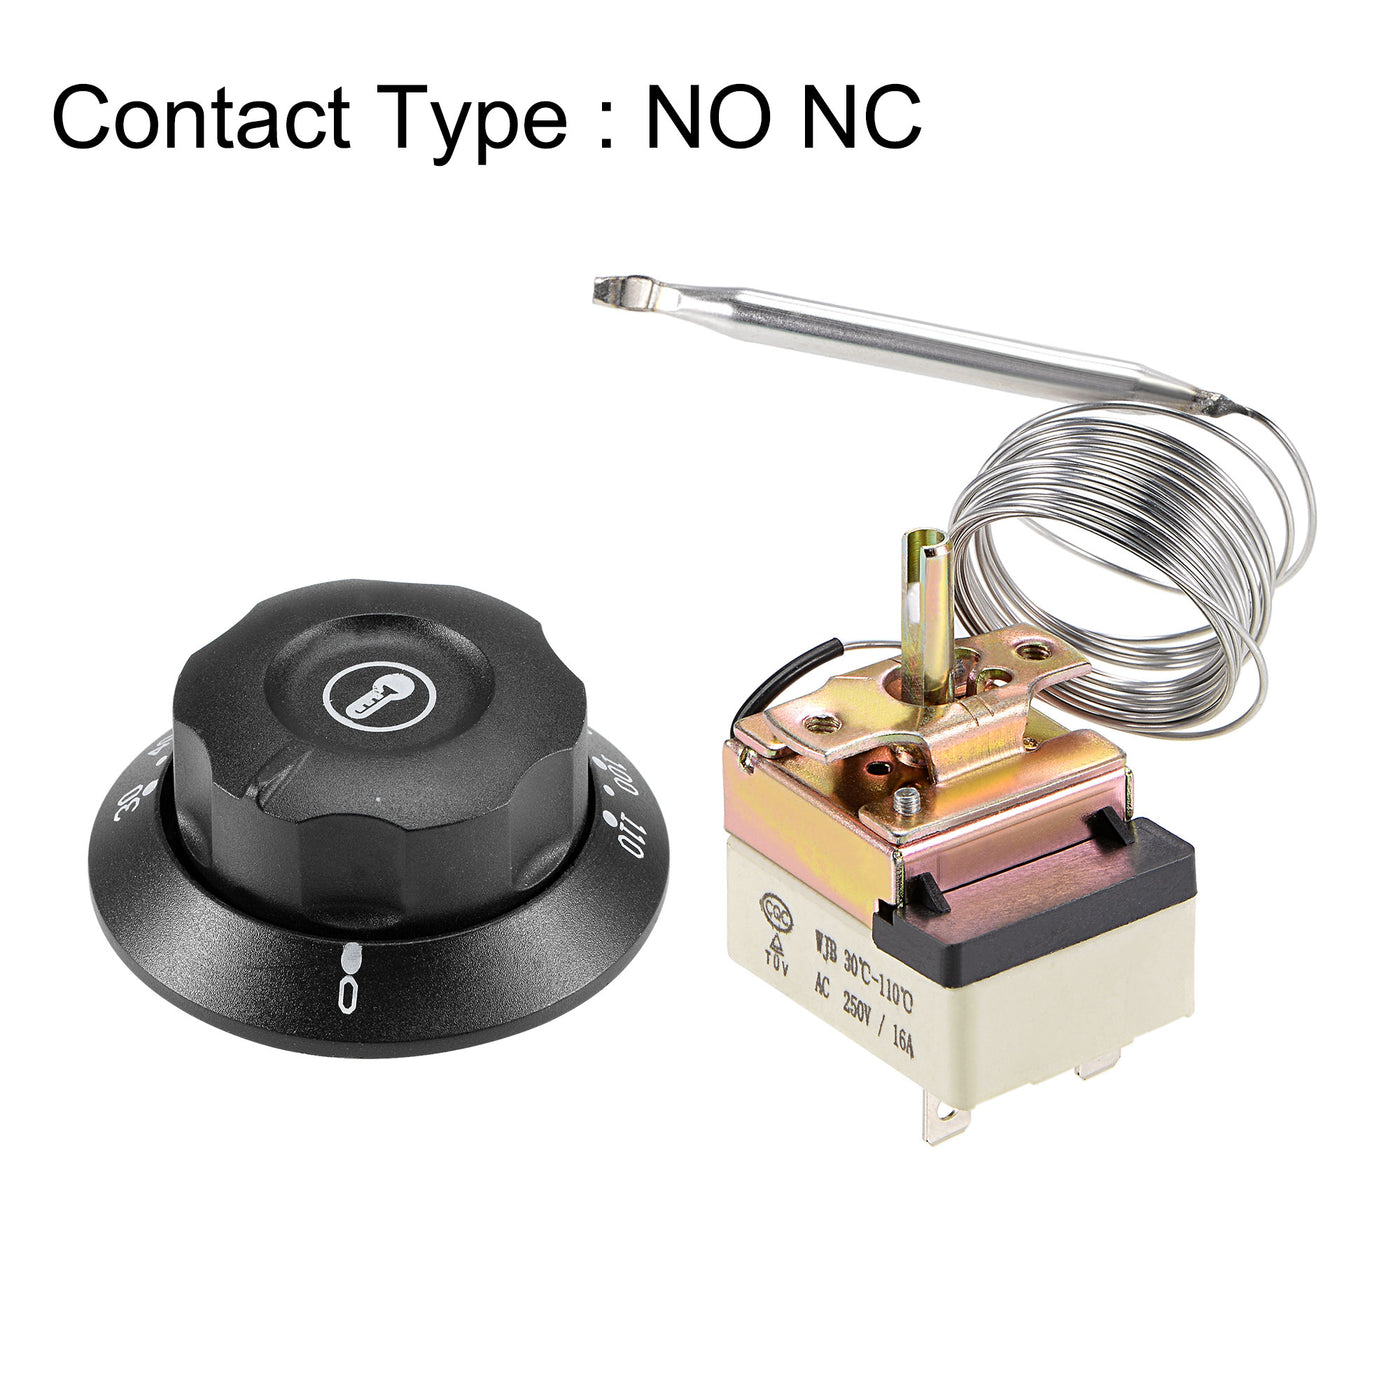 uxcell Uxcell 1NO 1NC 250V 16A 30-110C Temperature Control Switch Capillary Thermostat for Oven Refrigerator Heater, 2m, with 2 Screws&3 Crimp Terminals